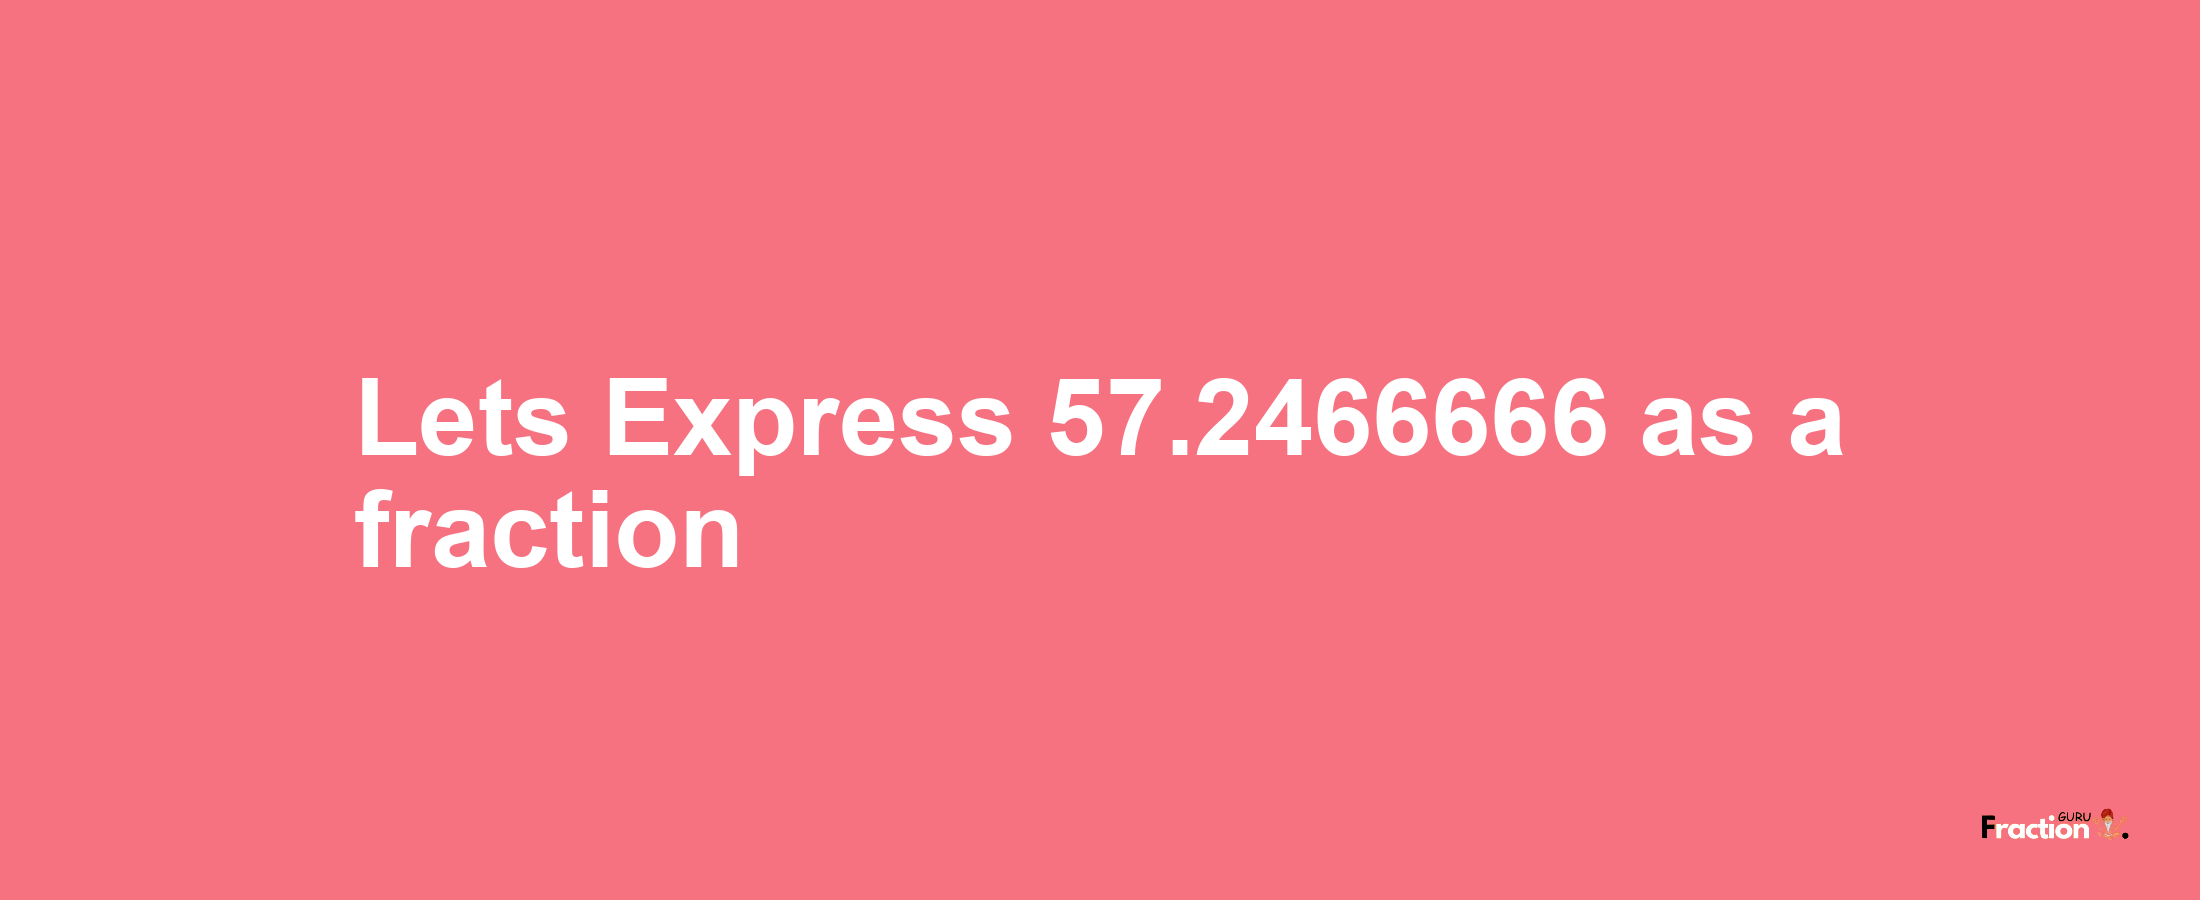 Lets Express 57.2466666 as afraction